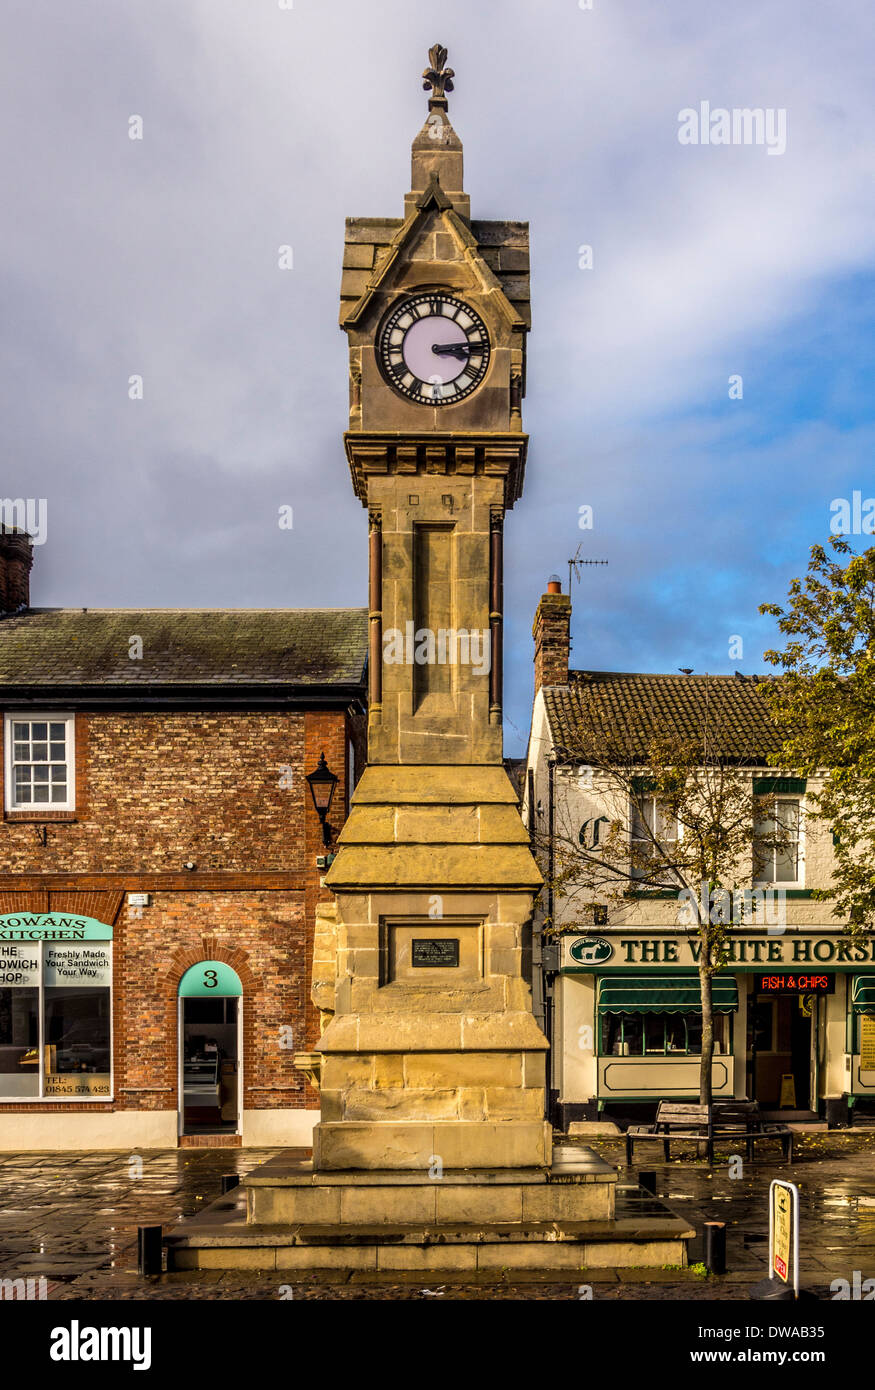 Clock monument in town square, Thirsk, North Yorkshire, UK. Stock Photo